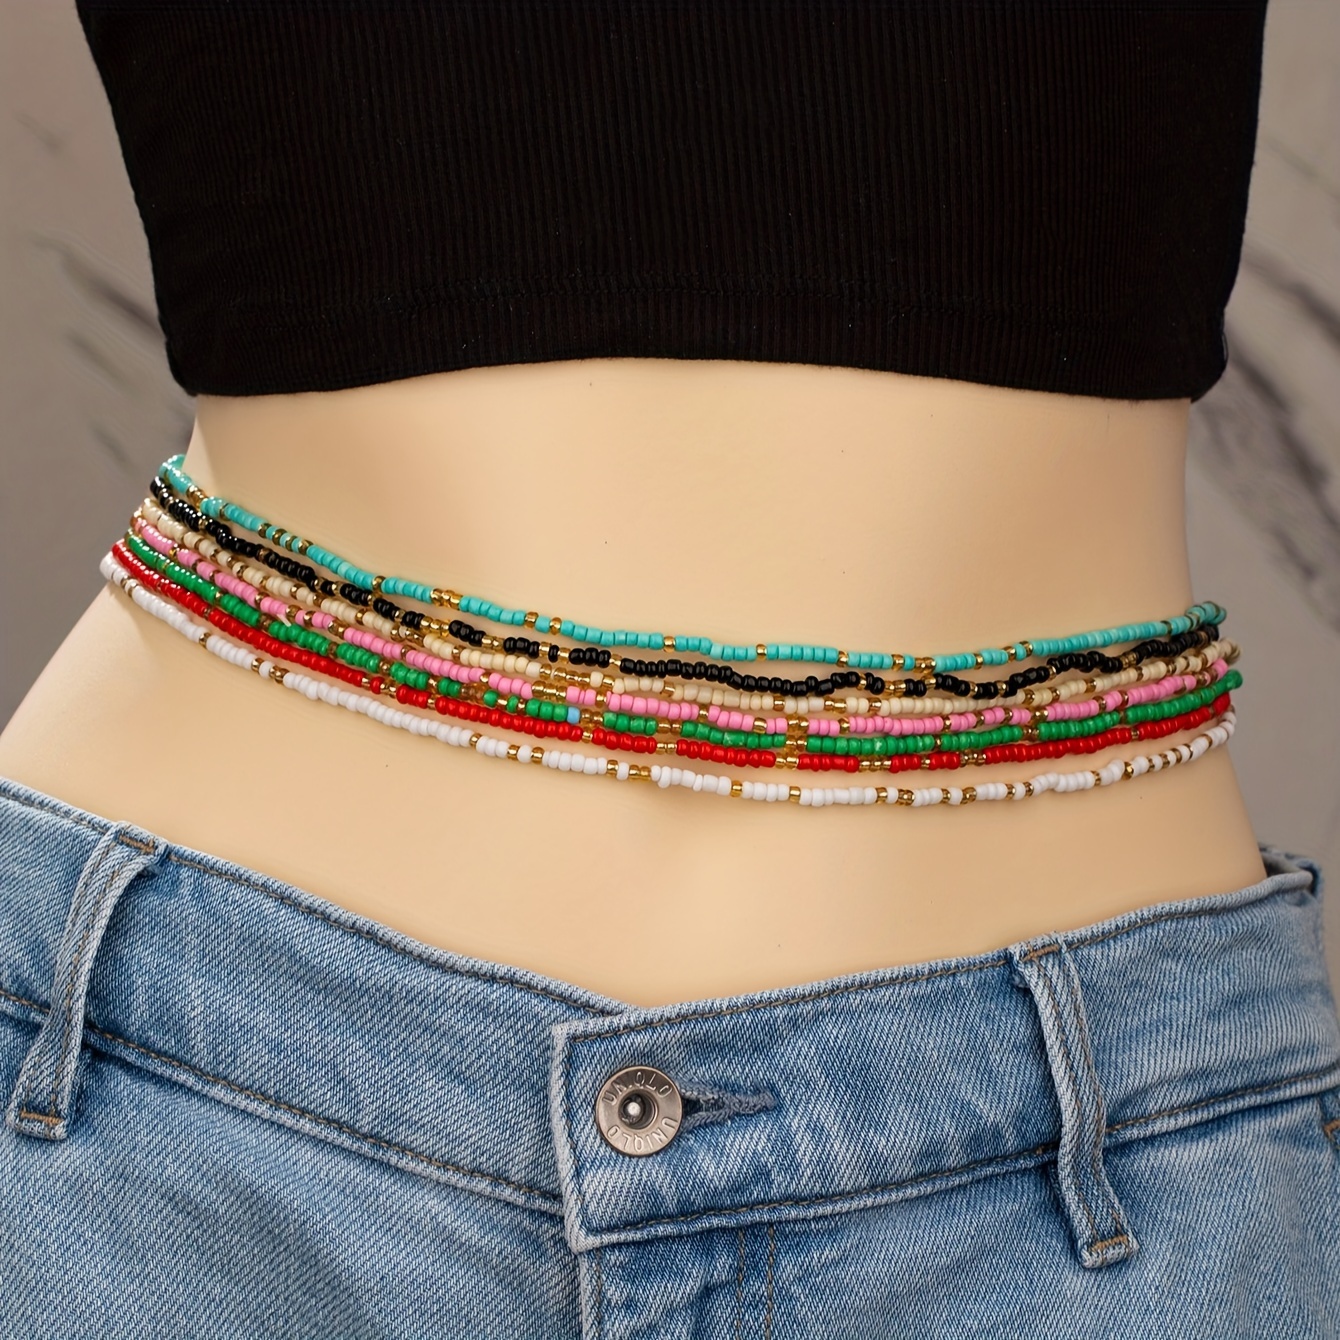 

7pcs Bohemian Style Beaded Waist Chains, Colorful Boho Beaded Belly Chains, Stacking Vacation Fashion Accessory For Women, Multicolor Beach Jewelry